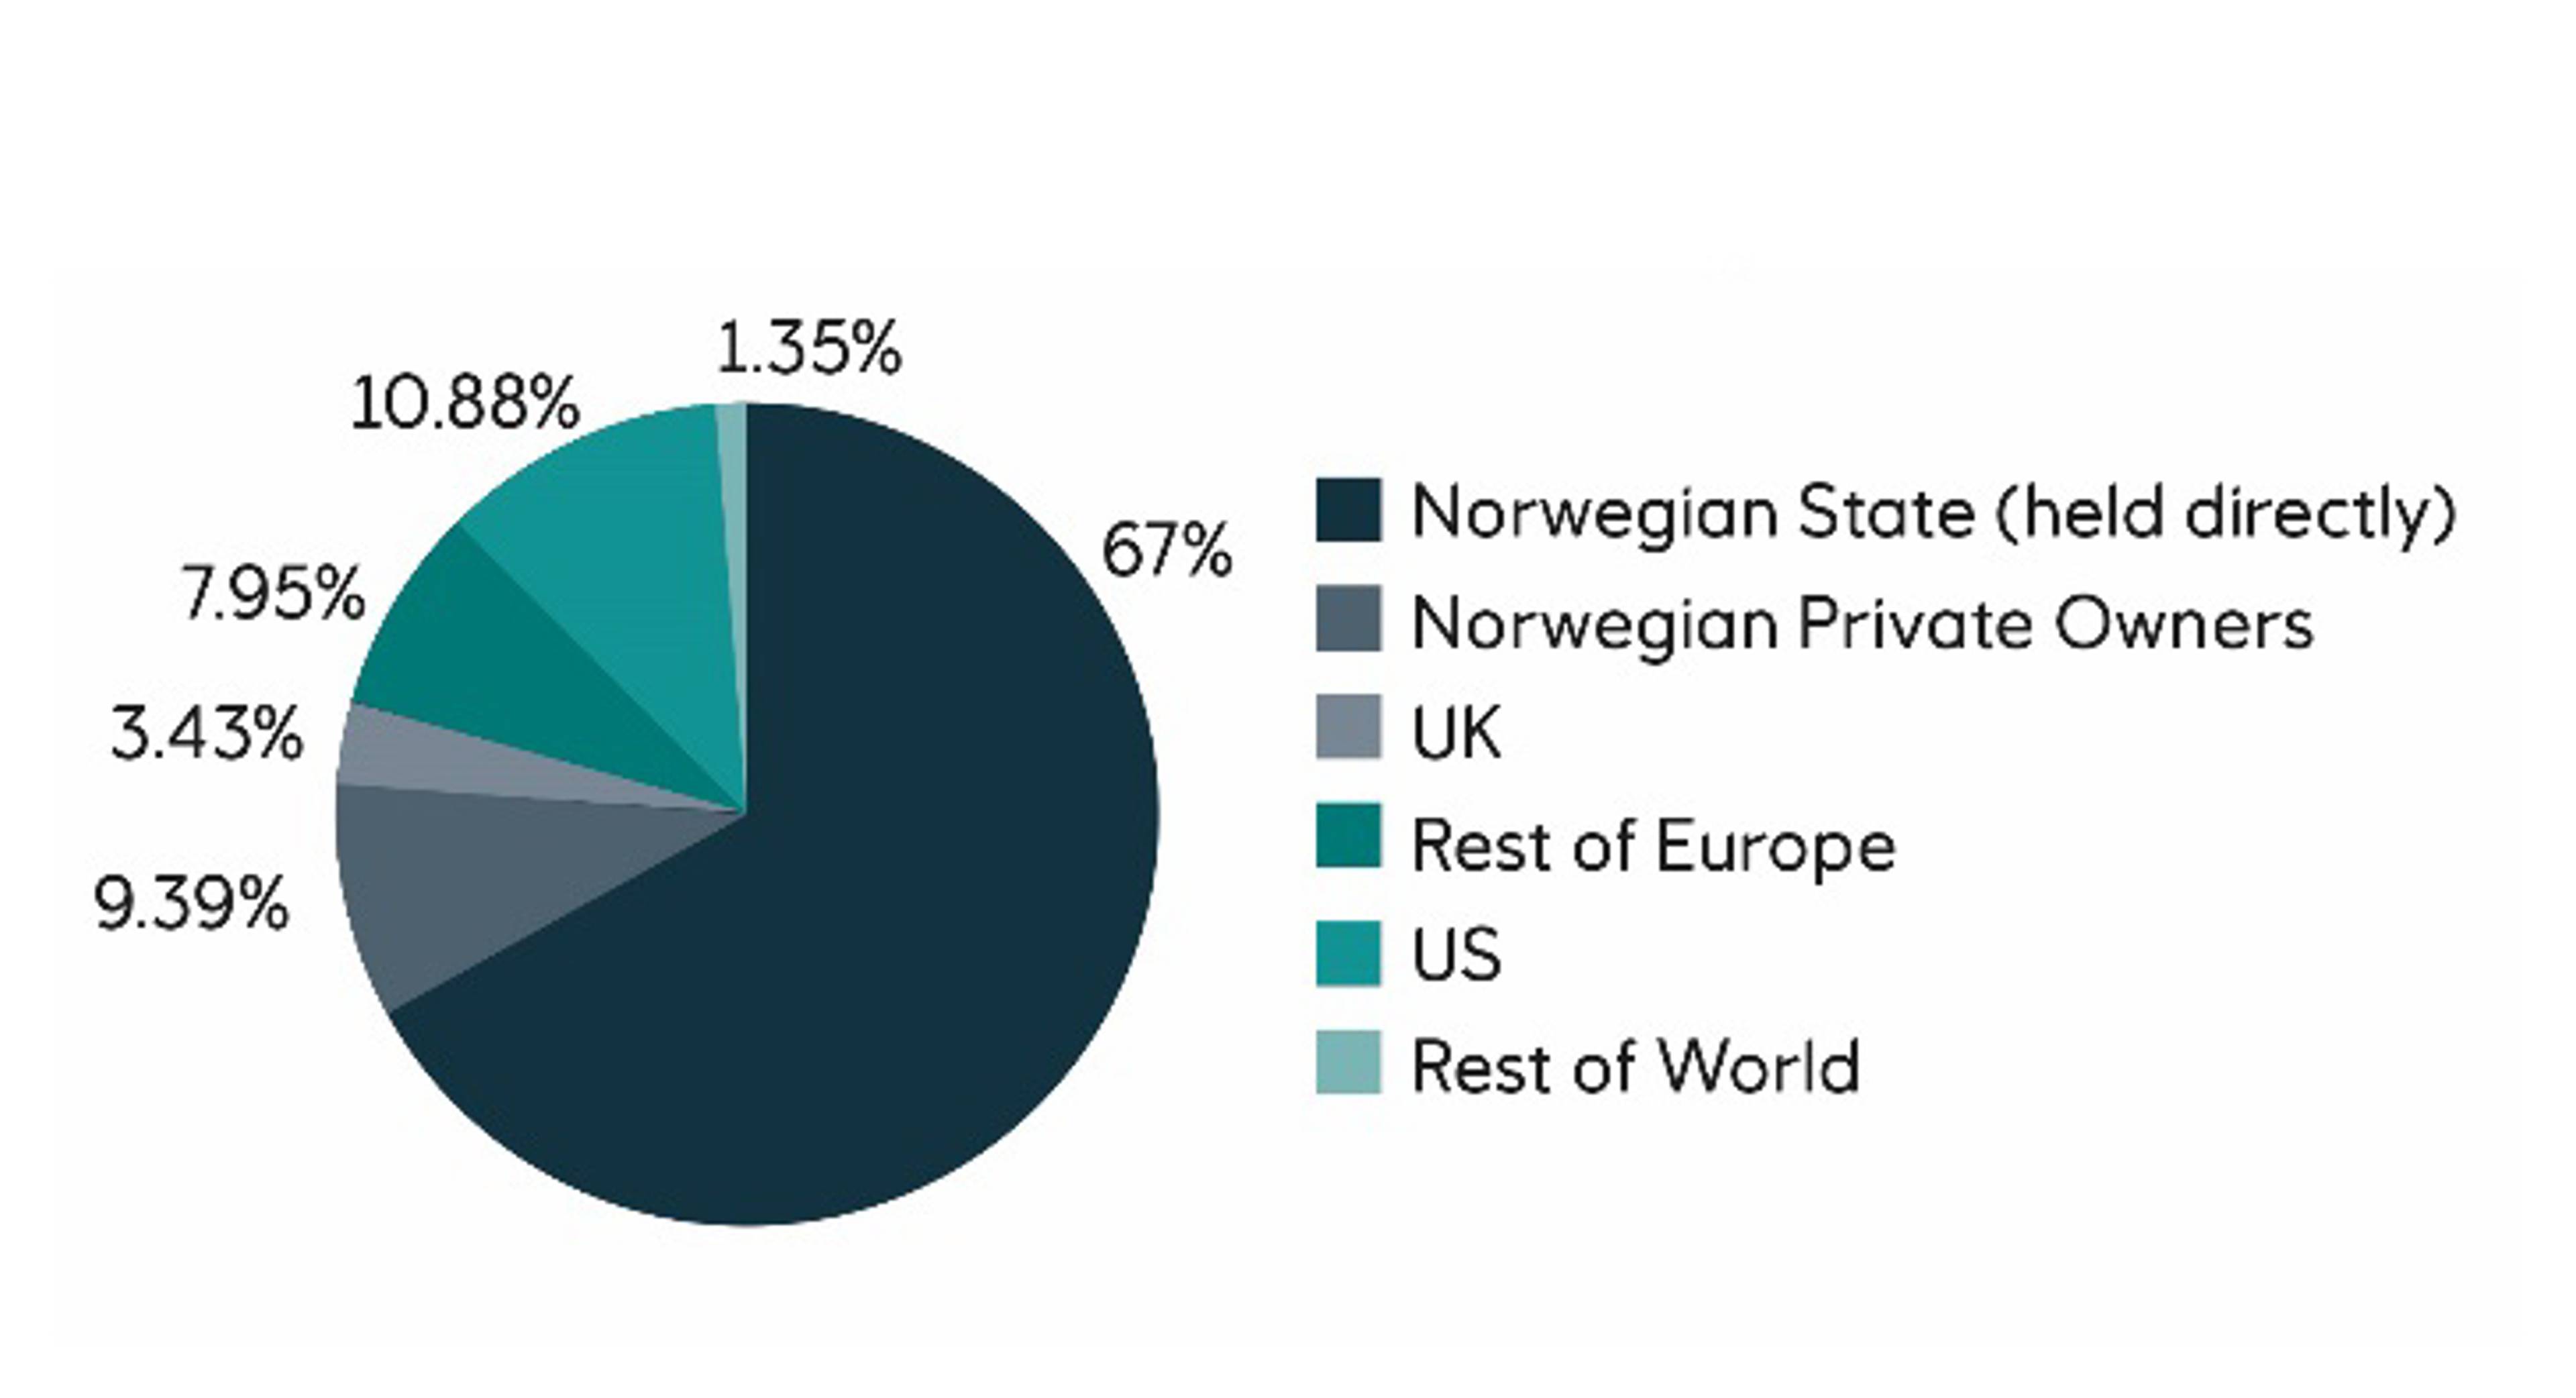 Pie chart showing geographic split of Equinor shareholders